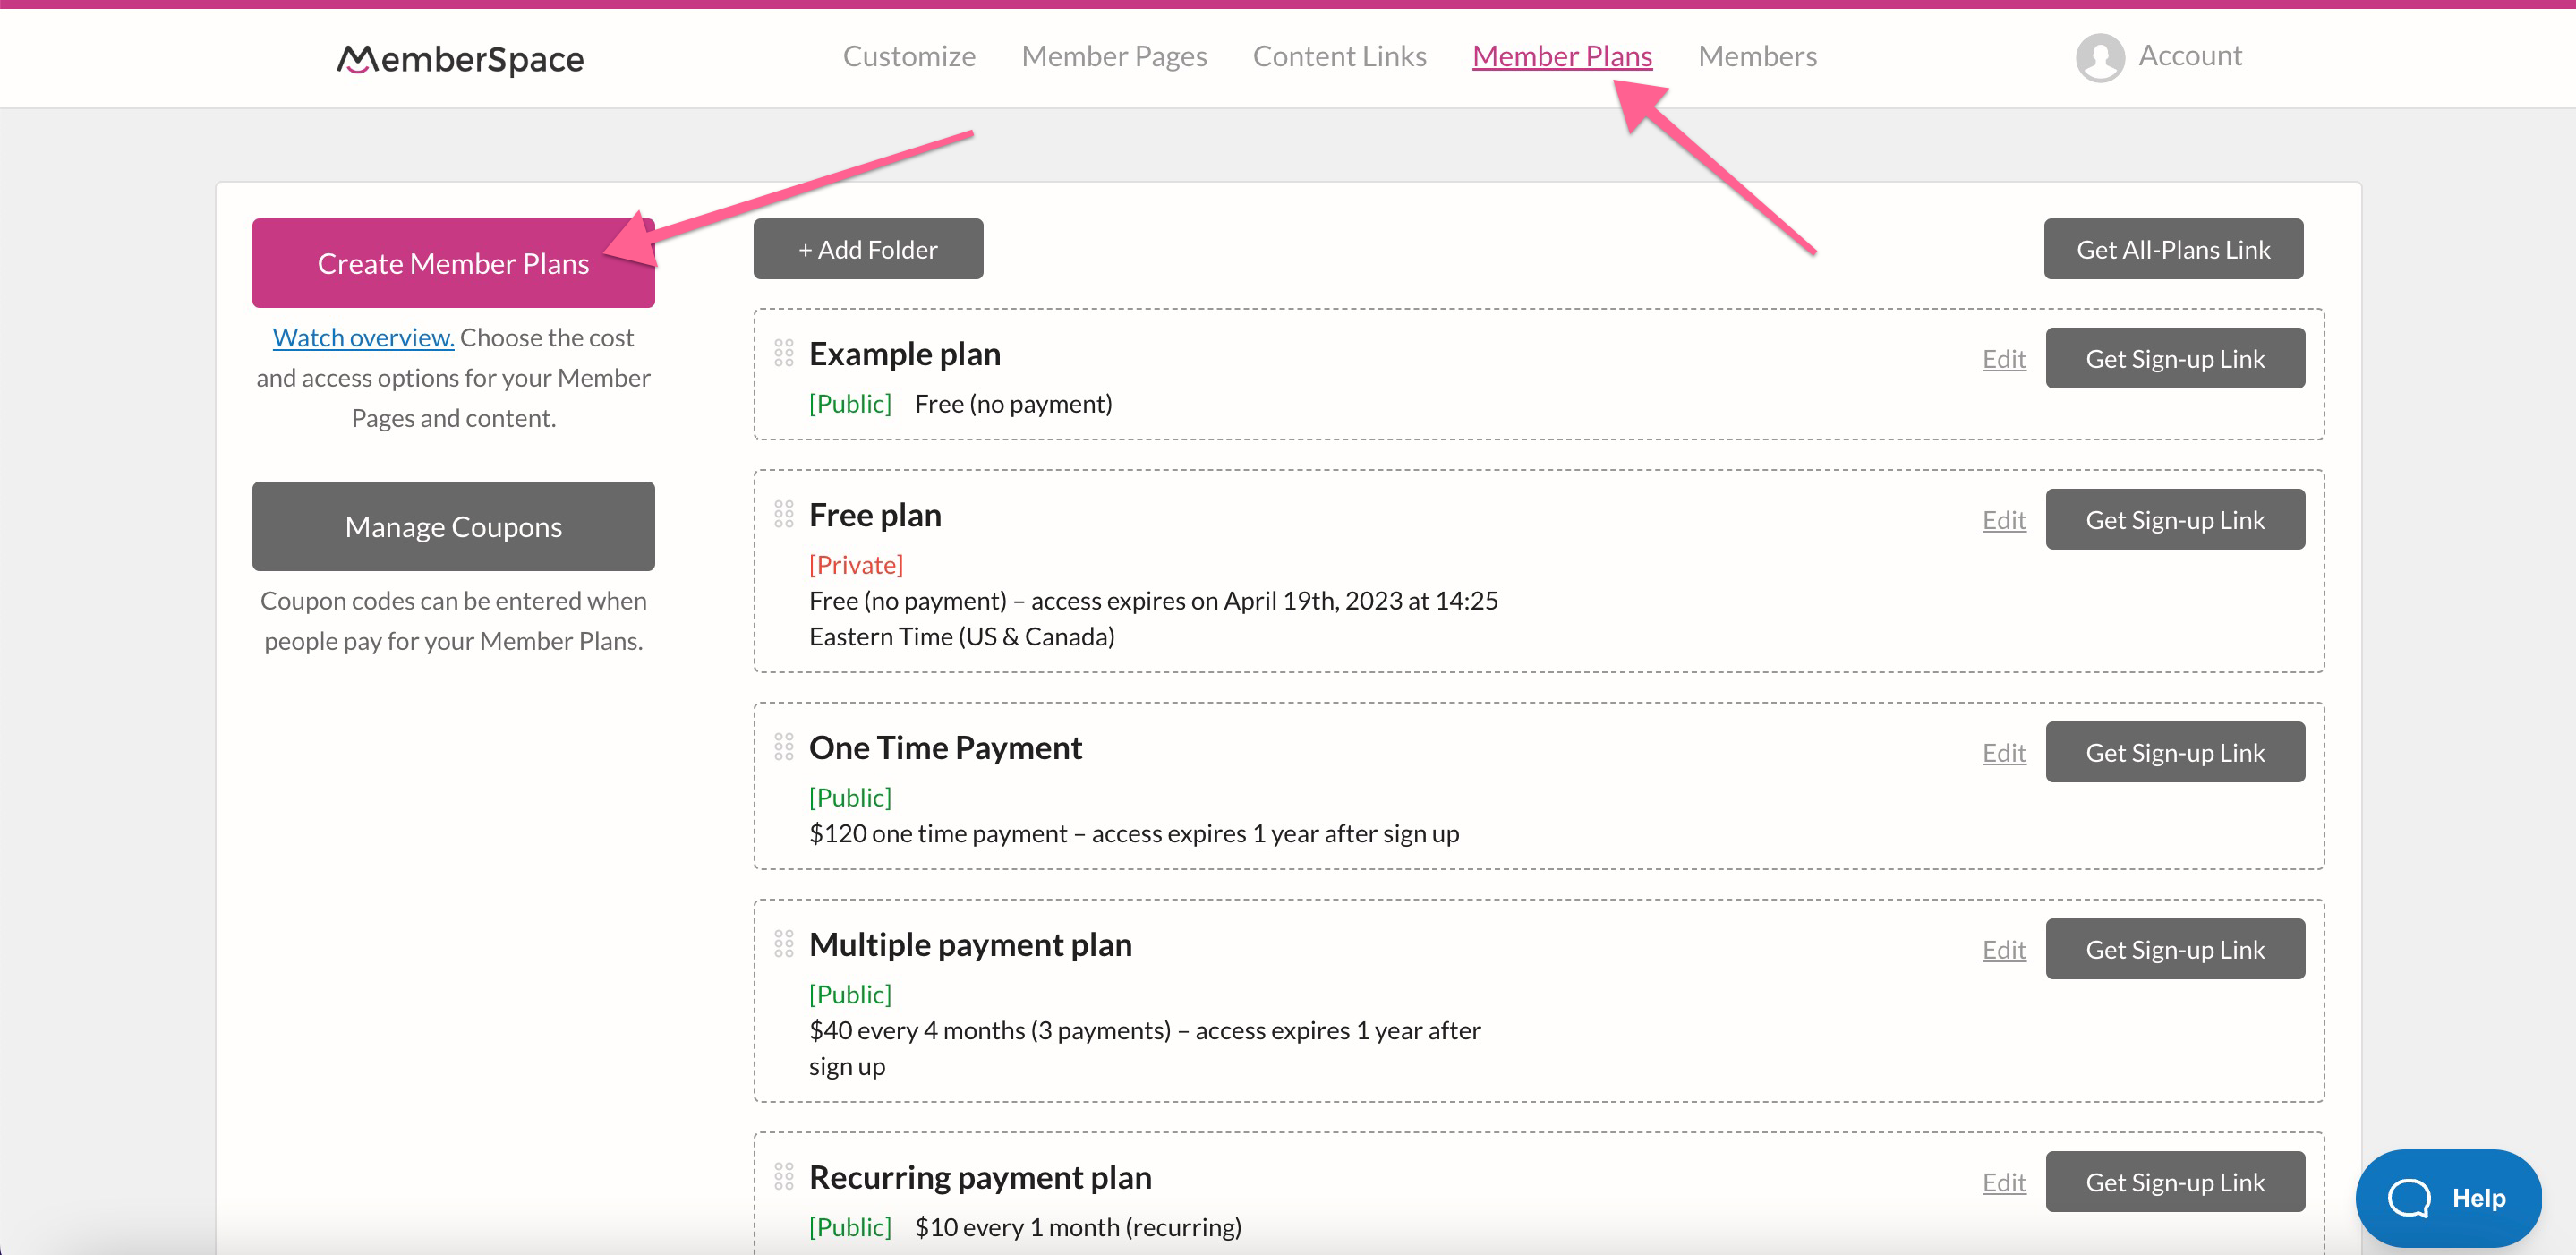 Create the in-person event as a Member Plan in MemberSpace